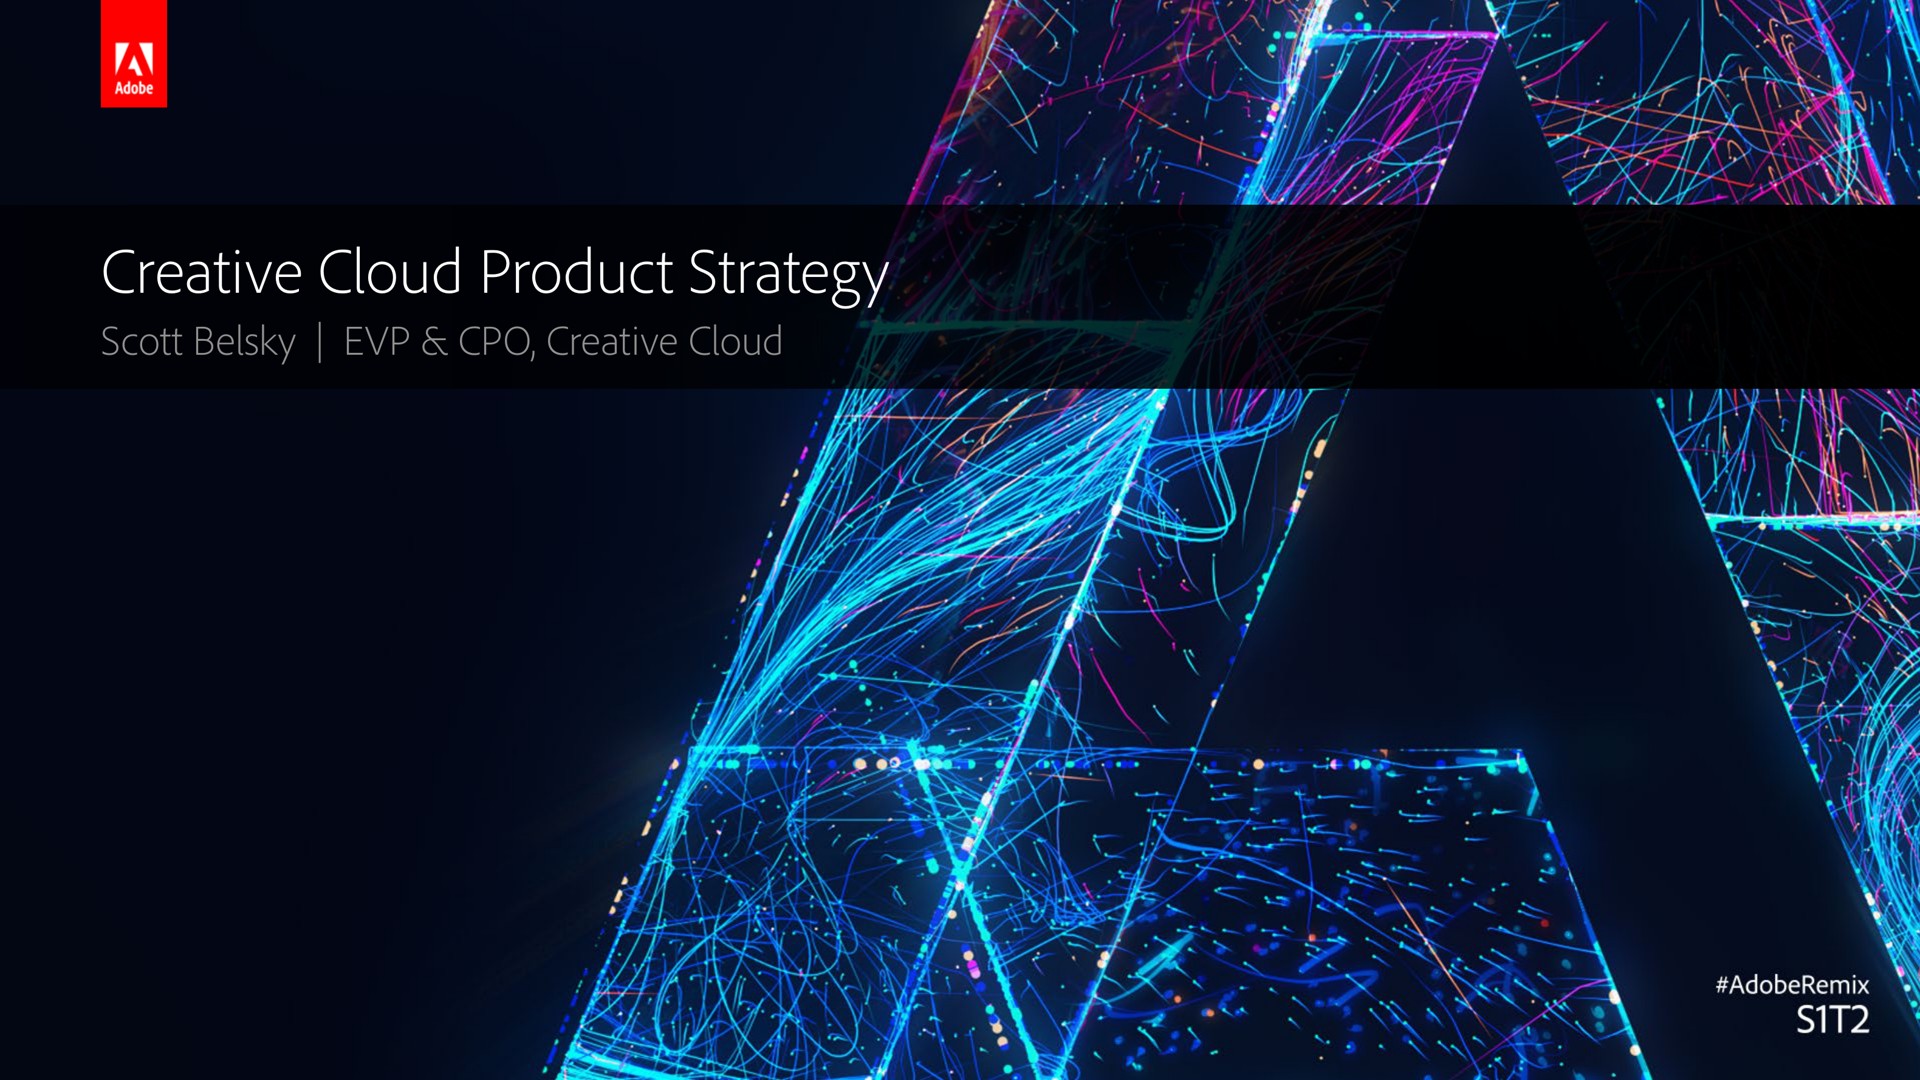 creative cloud product strategy | Adobe